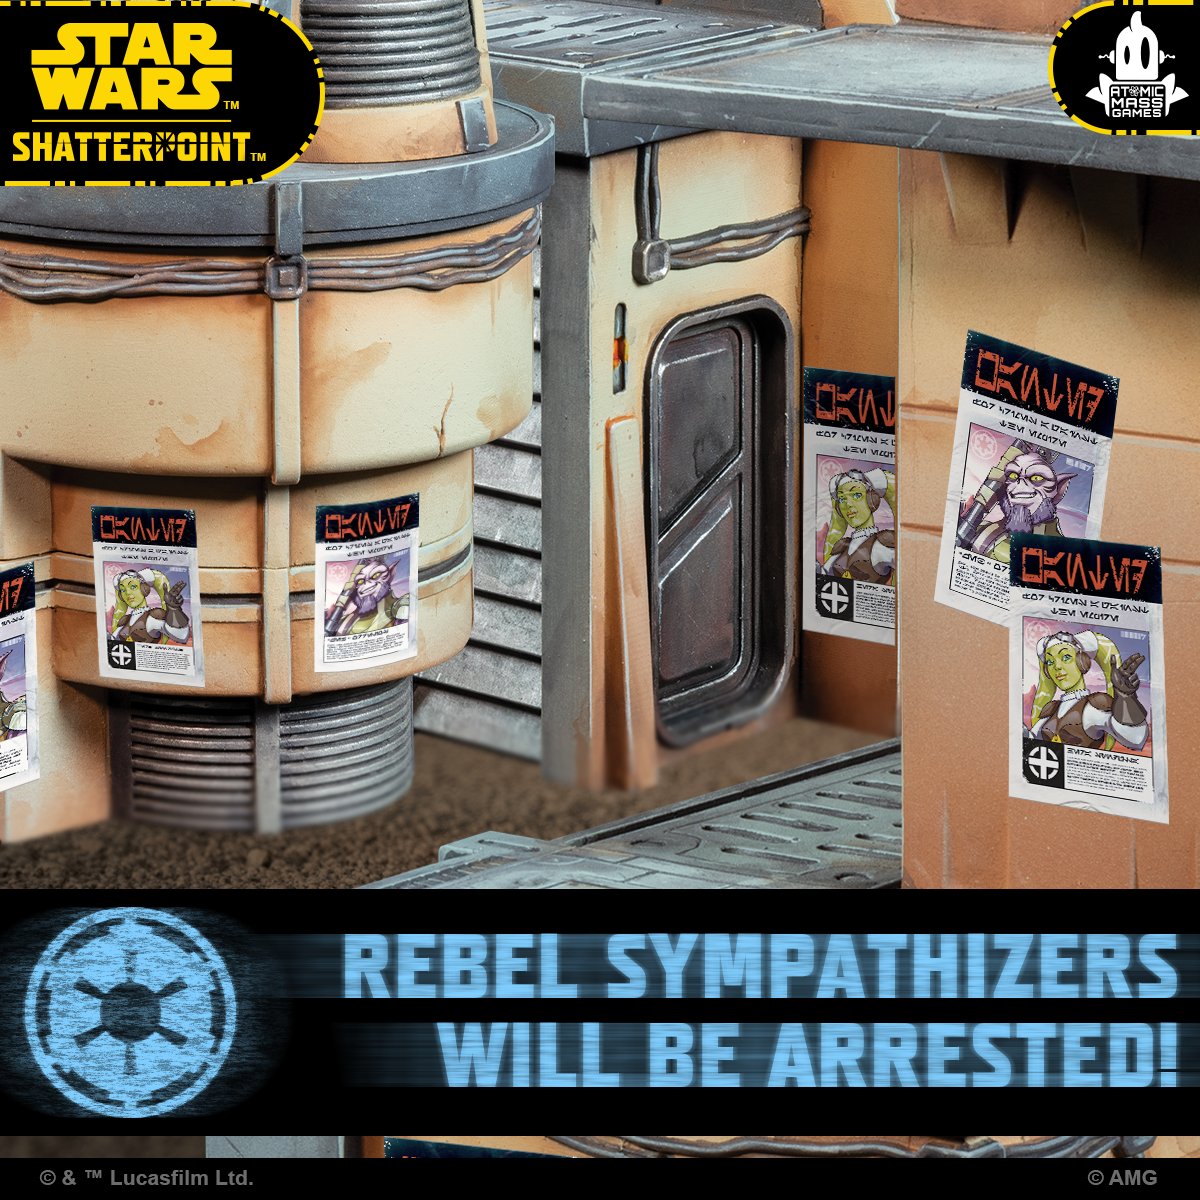 We require reports on rebel activity! Place any evidence of their whereabouts in the comments below!